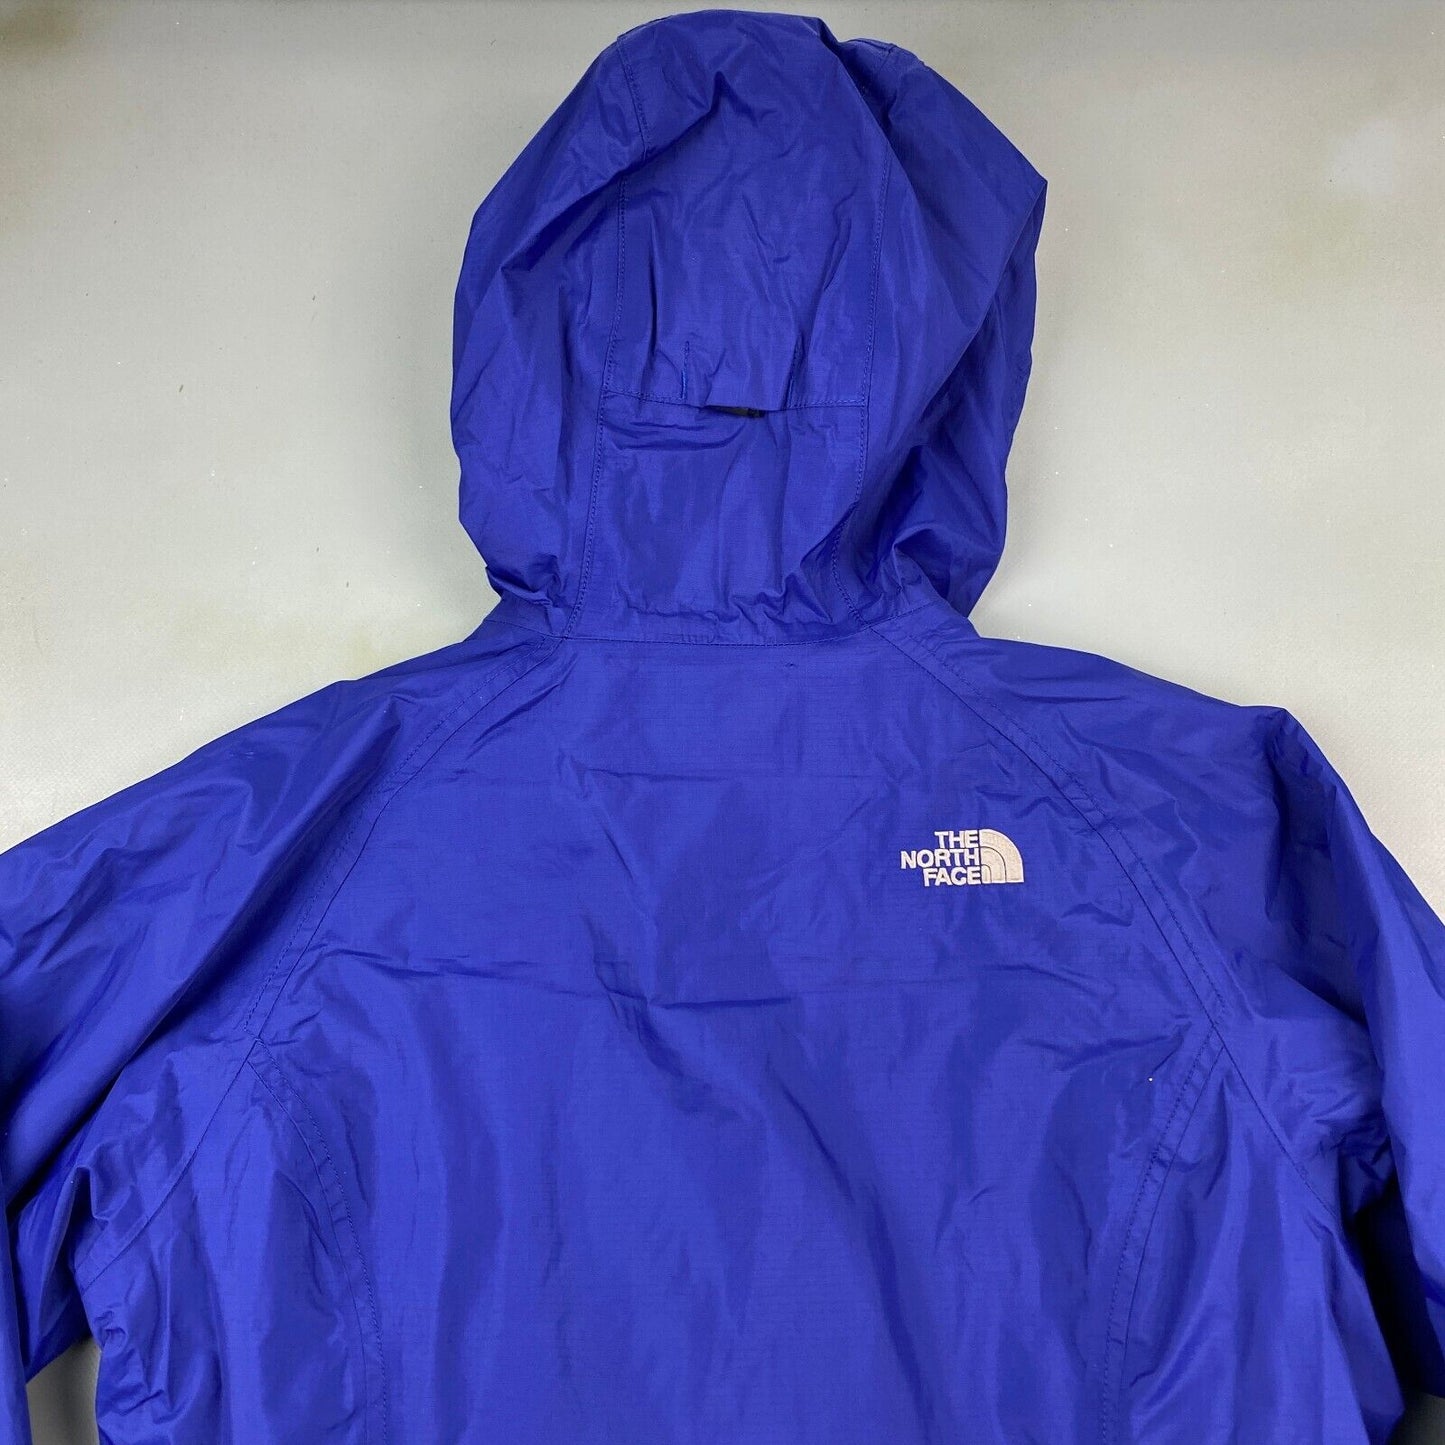 VINTAGE The North Face Hyvent Blue Shell Windbreaker Jacket sz Small Womens